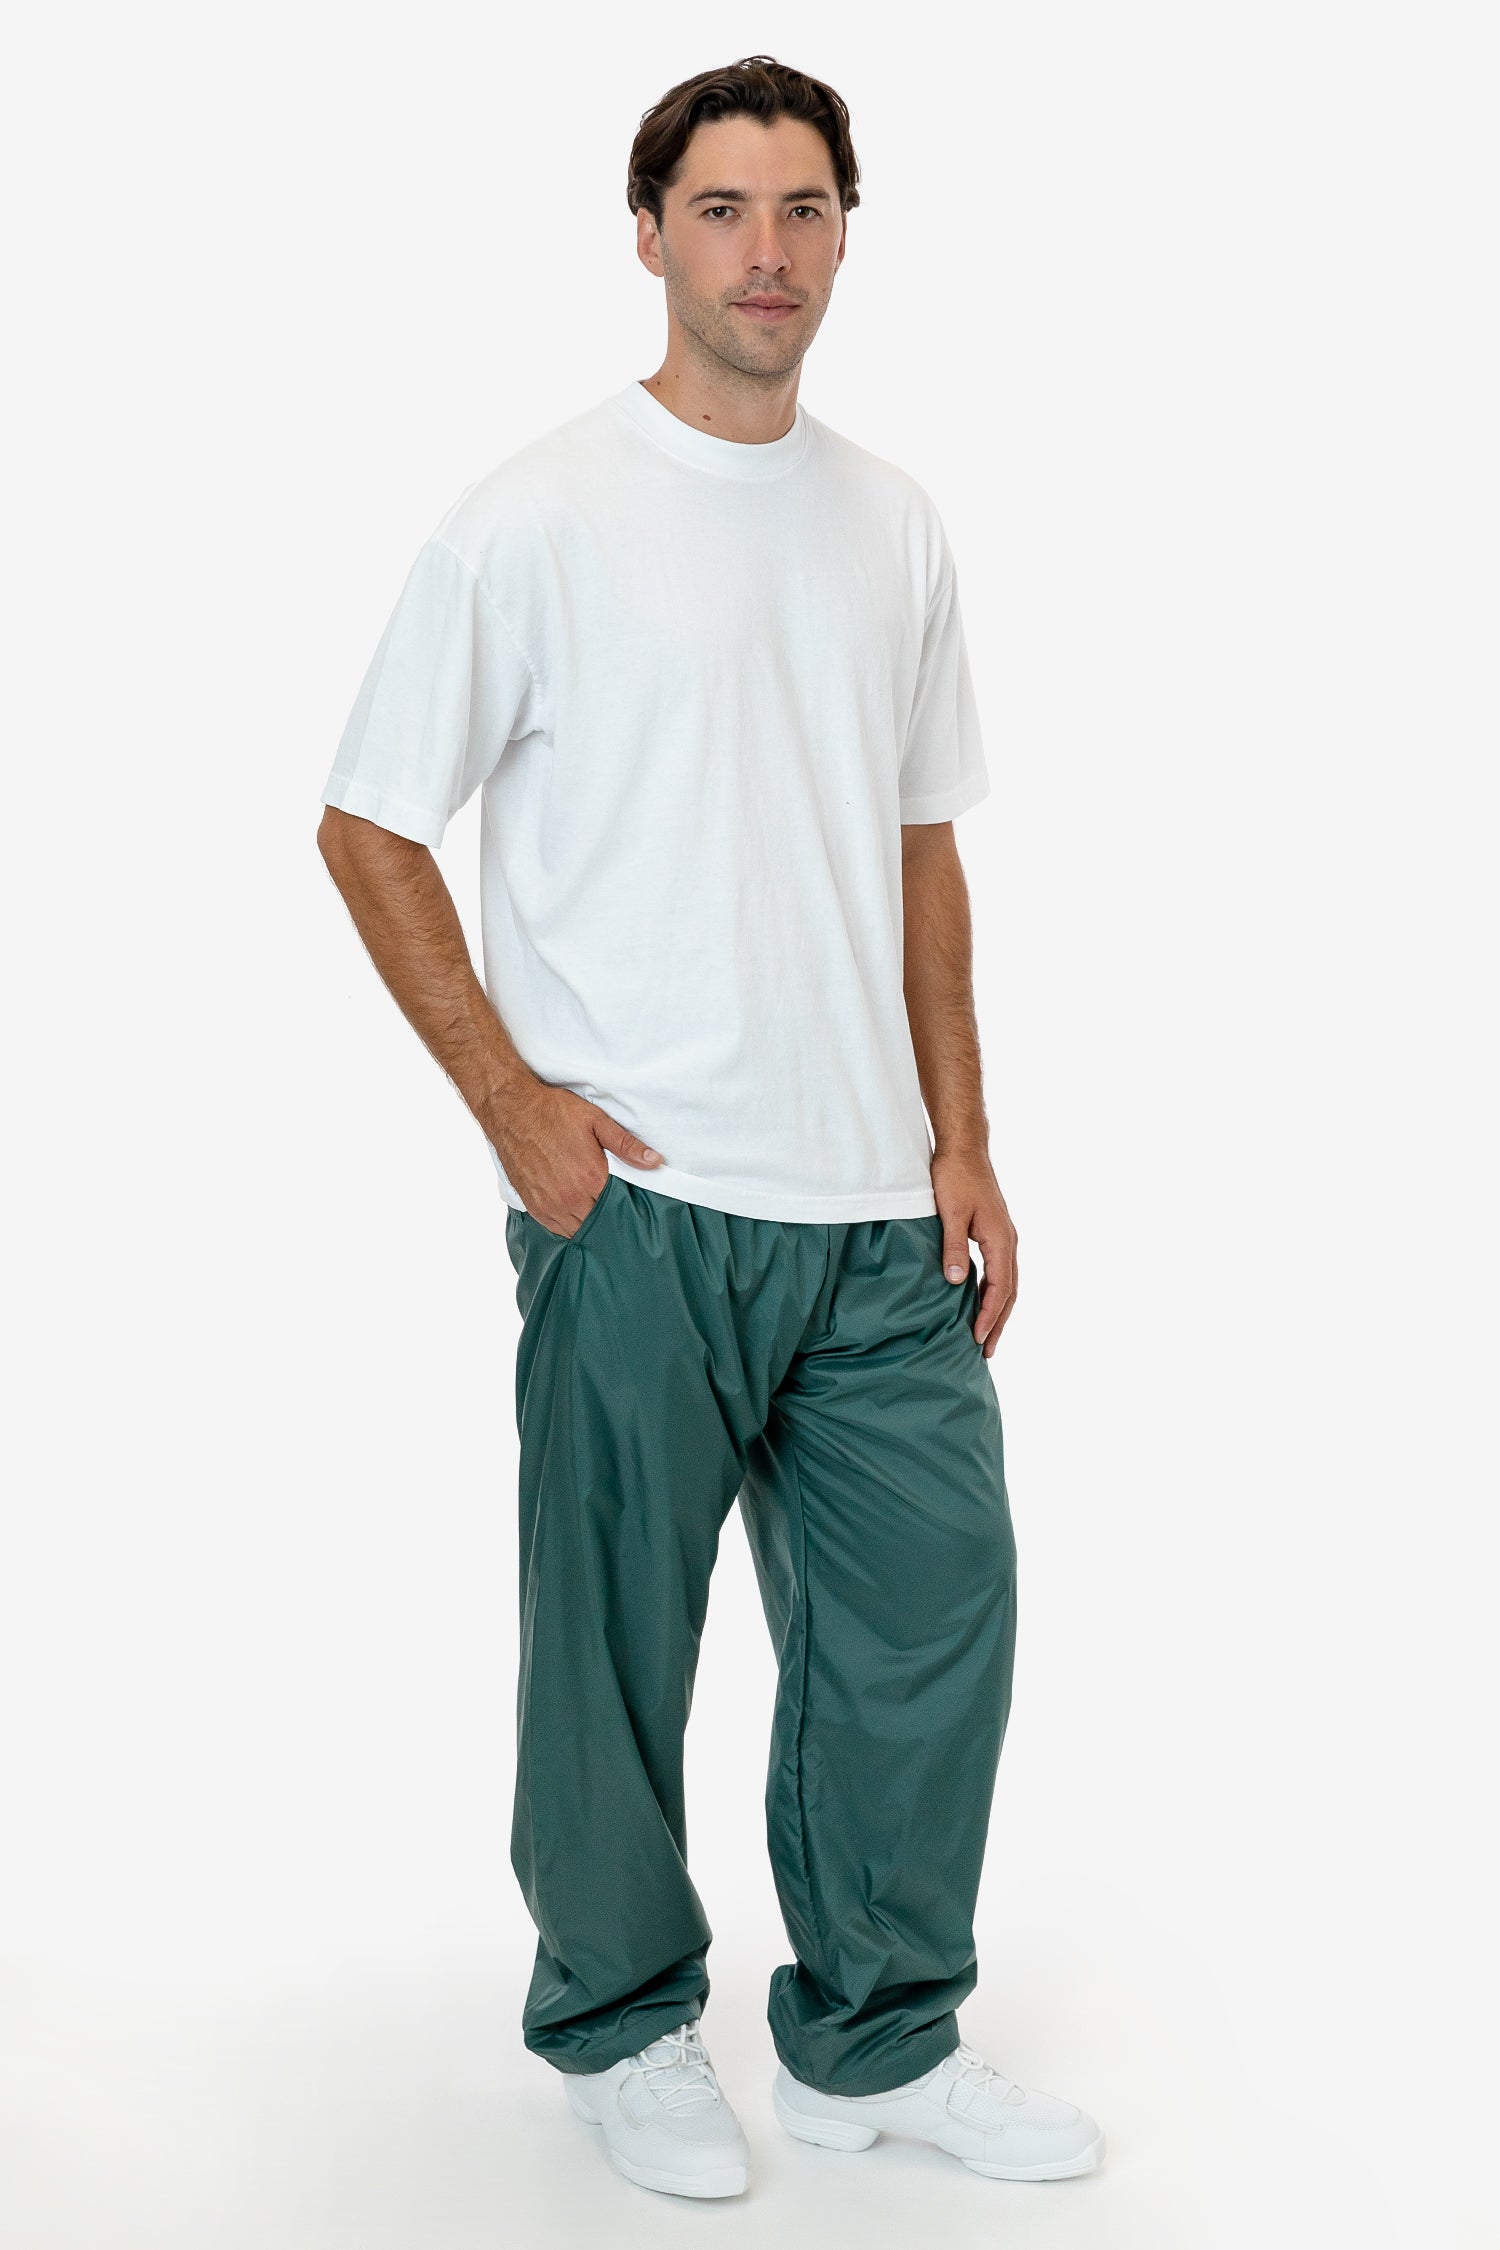 Update more than 81 adidas cricket trousers super hot - in.cdgdbentre